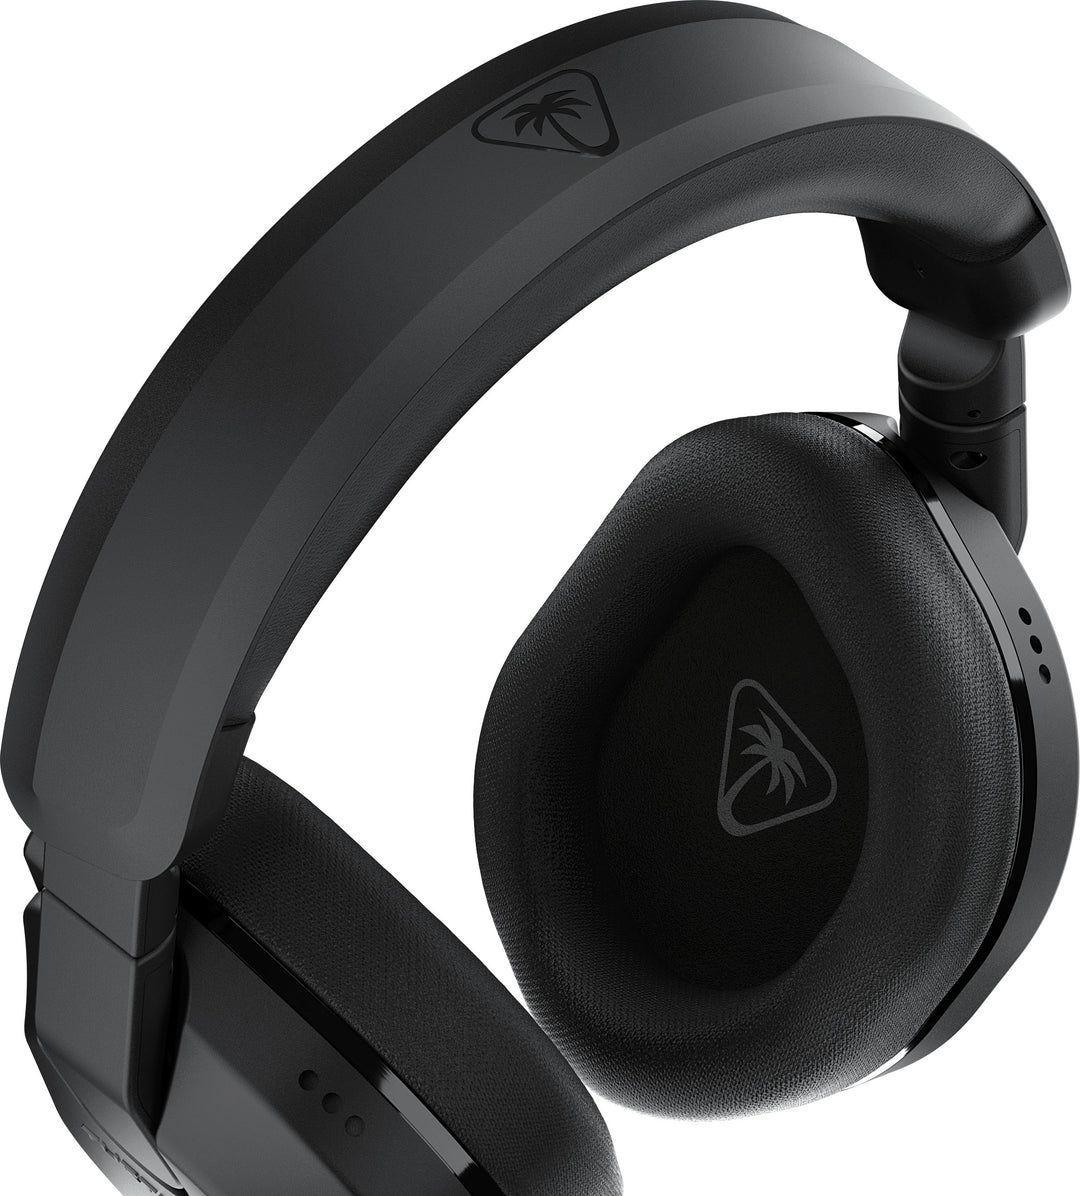 Turtle Beach Stealth 600 Wireless Gaming Headset for Xbox Series X|S, PC, PS5, PS4, Nintendo Switch with 80-Hr Battery - Black_6